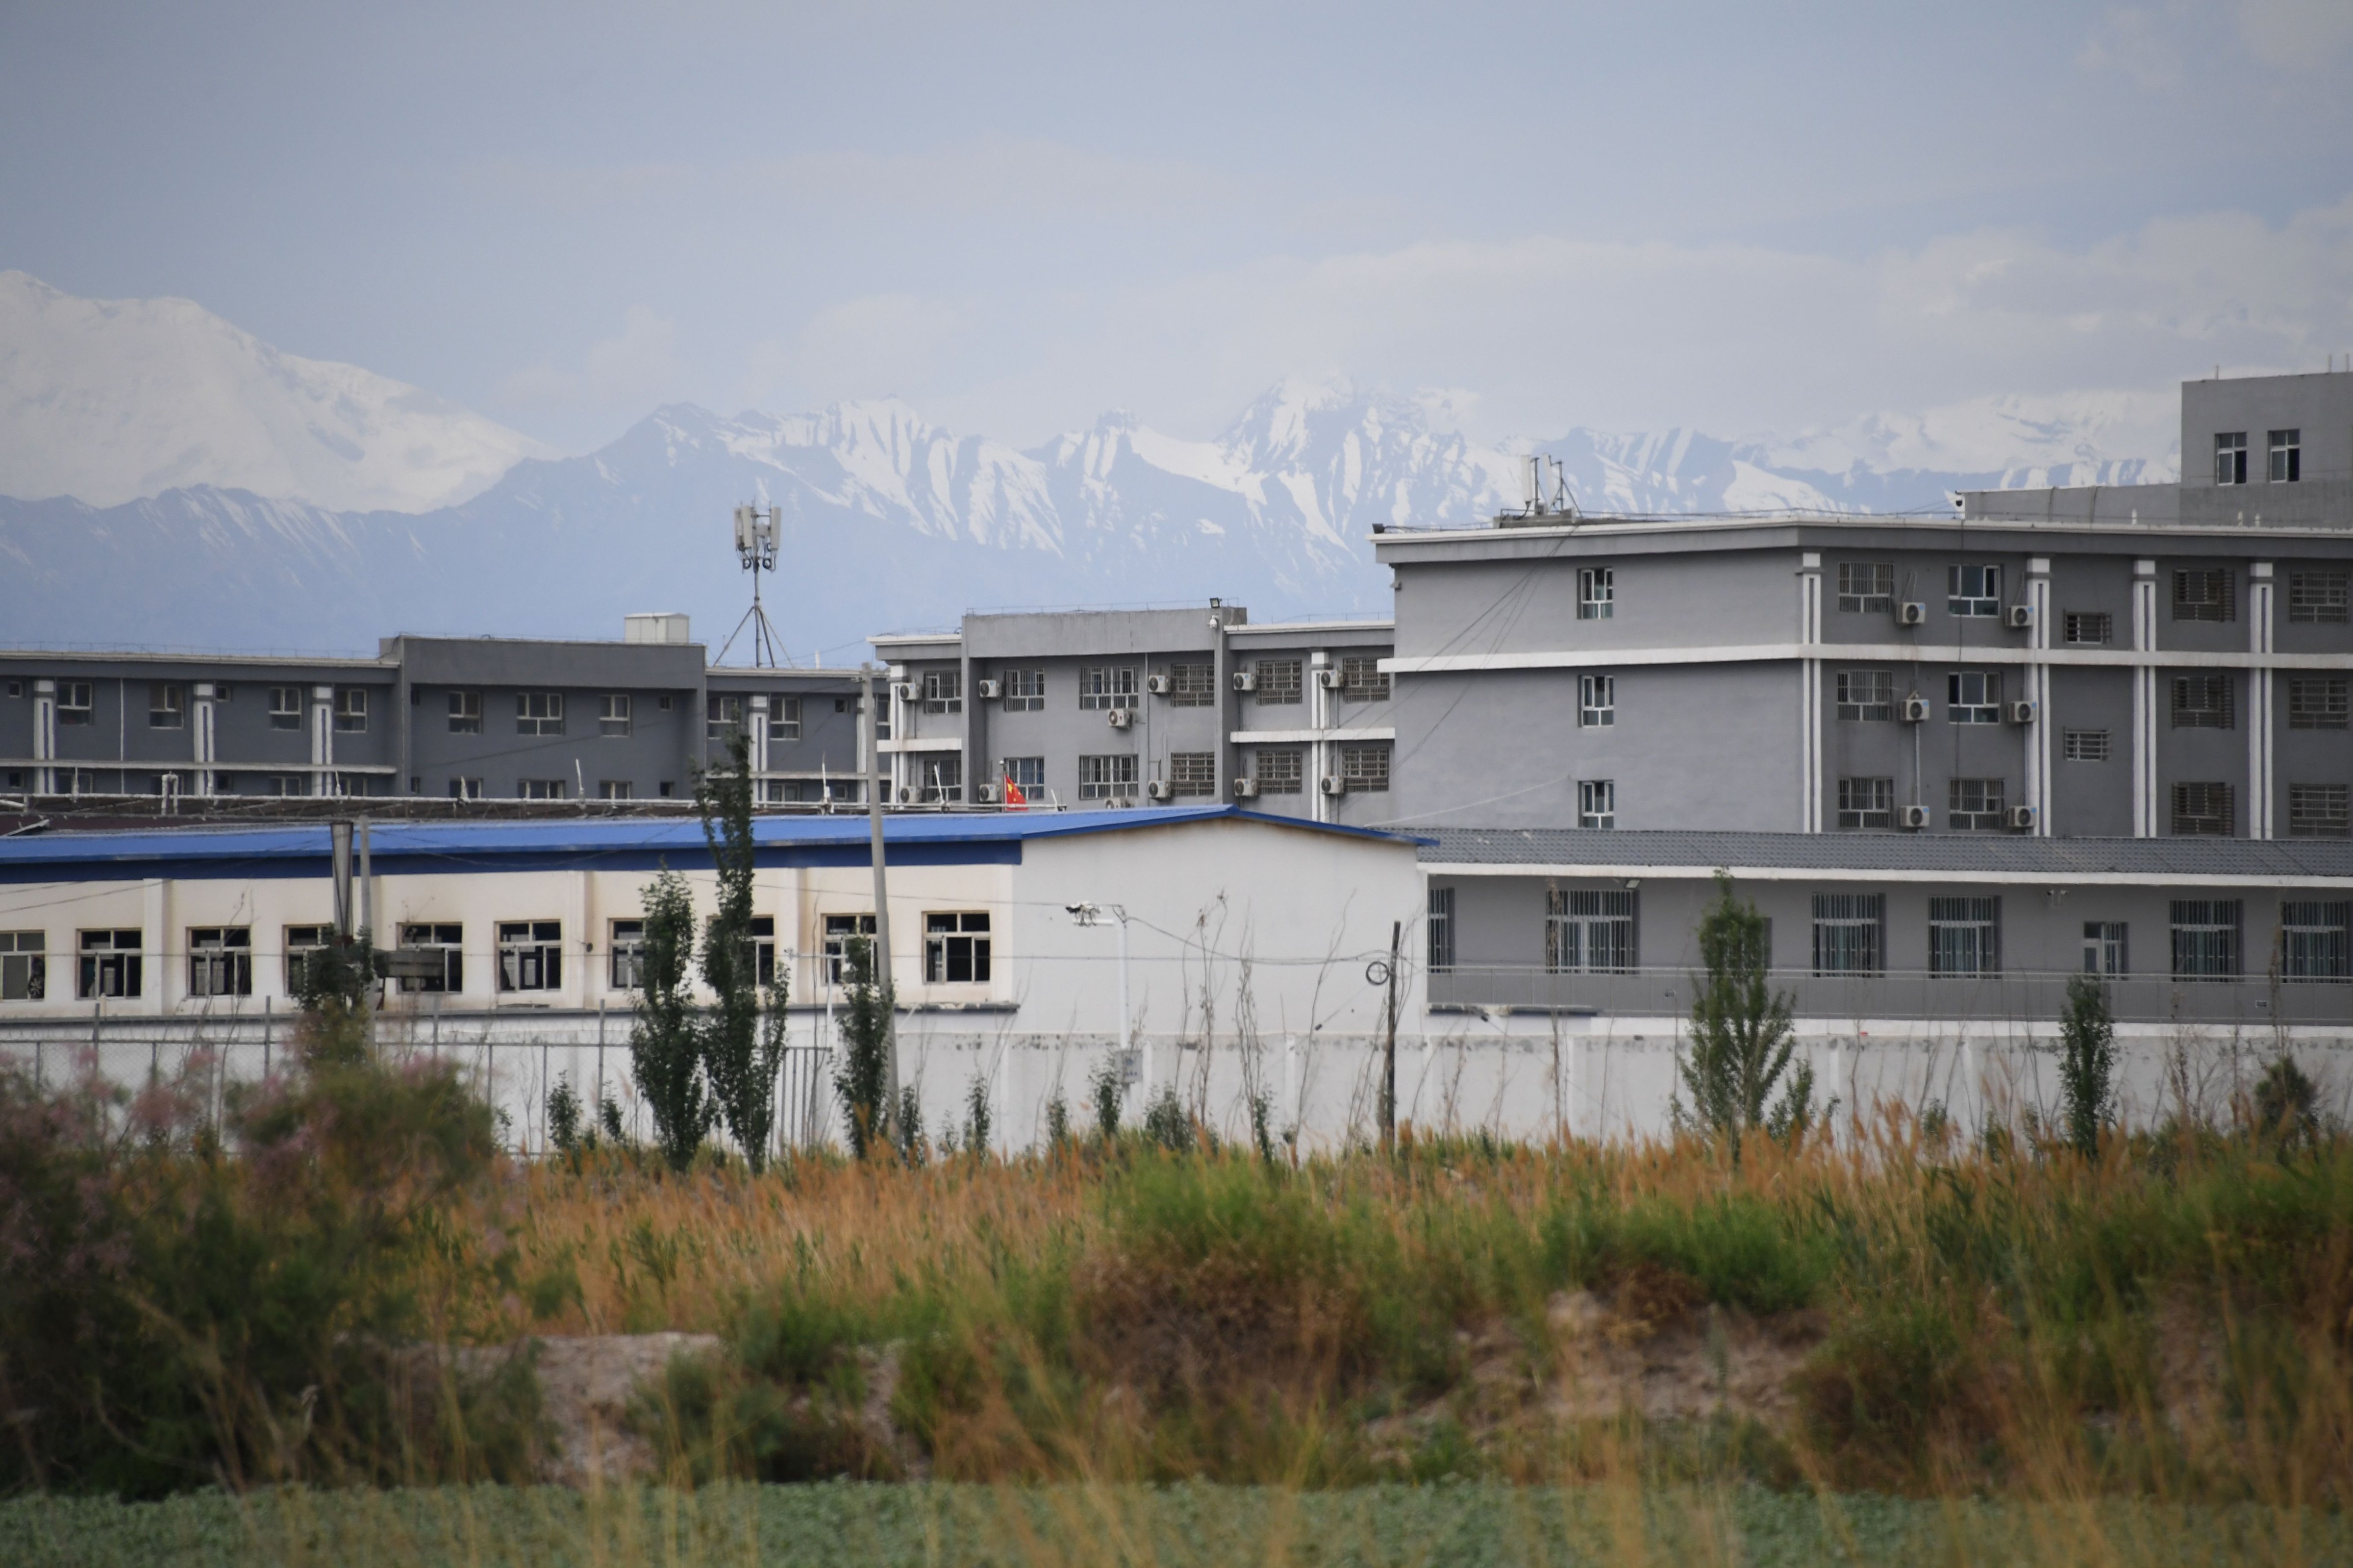 This photo taken on June 4, 2019 shows a facility believed to be a re-education camp where mostly Muslim ethnic minorities are detained, north of Akto in China's northwestern Xinjiang region. (GREG BAKER—AFP via Getty Images)